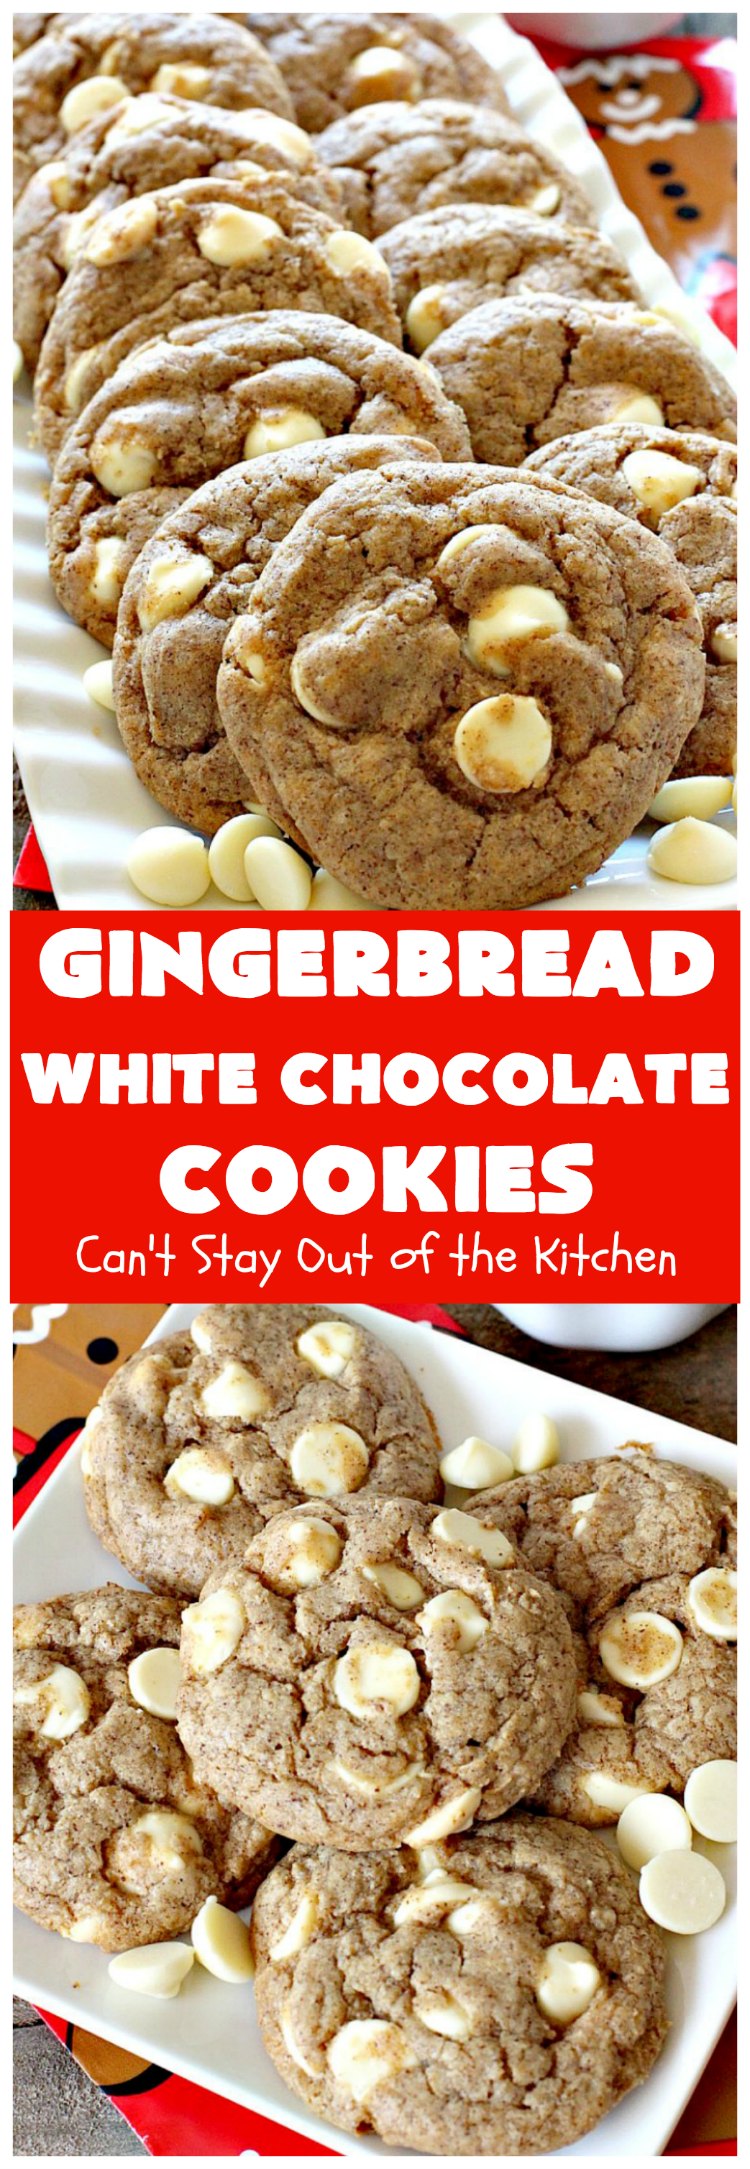 Gingerbread White Chocolate Cookies | Can't Stay Out of the Kitchen | this incredibly easy 5-ingredient #cookie recipe is heavenly. It's terrific for #holiday baking, #Christmas cookie exchanges & office parties. #dessert #gingerbread #chocolate 